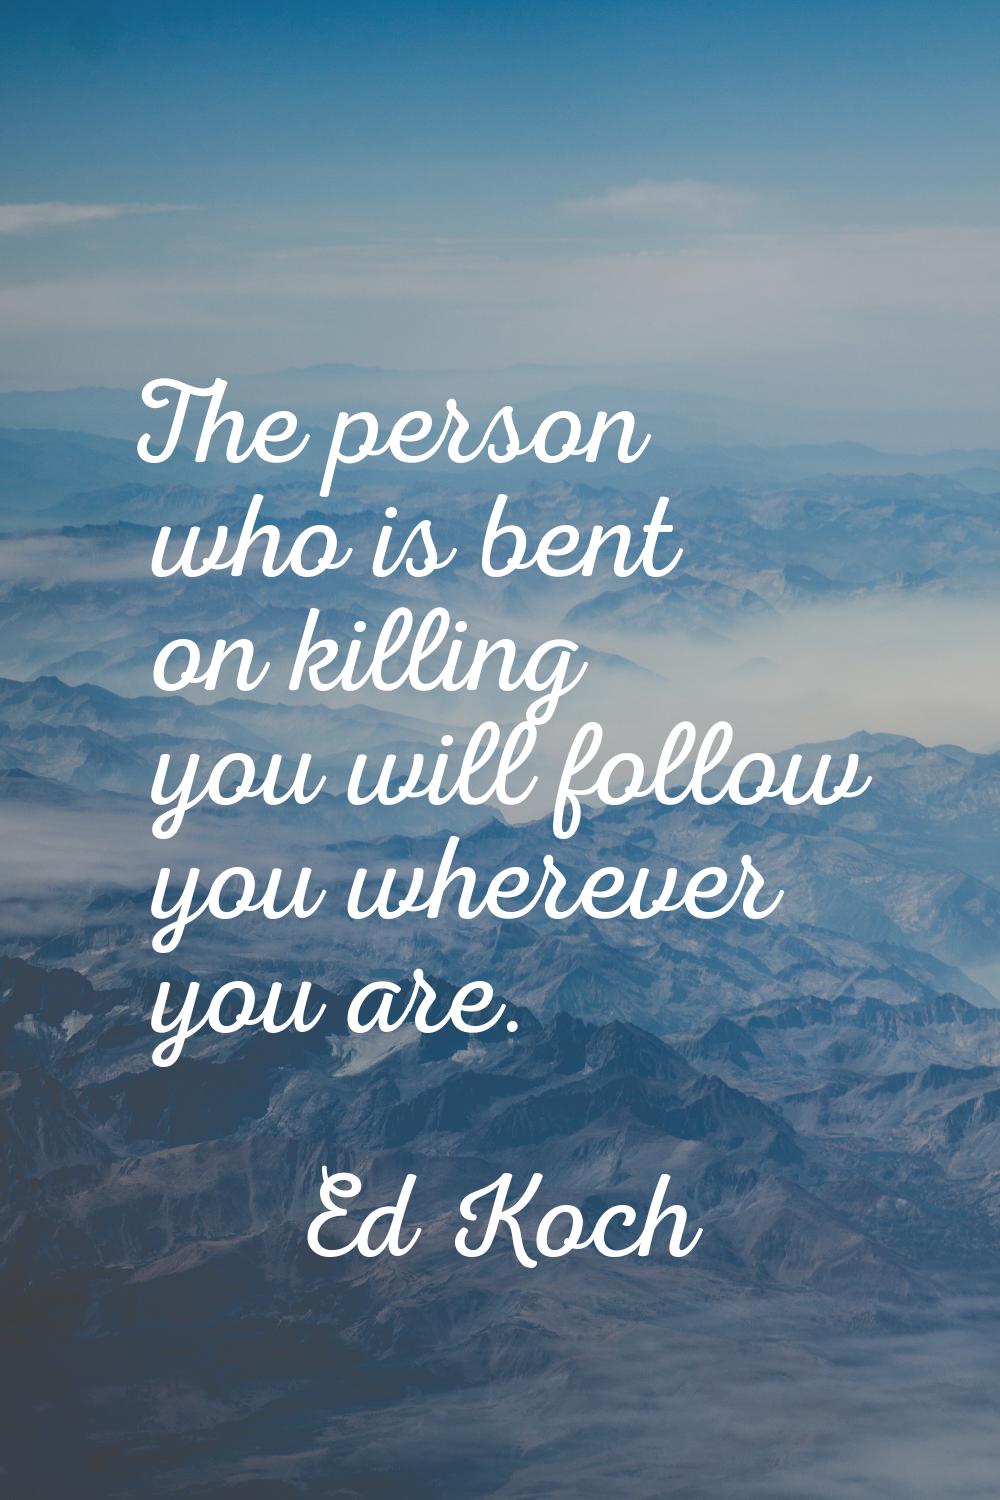 The person who is bent on killing you will follow you wherever you are.